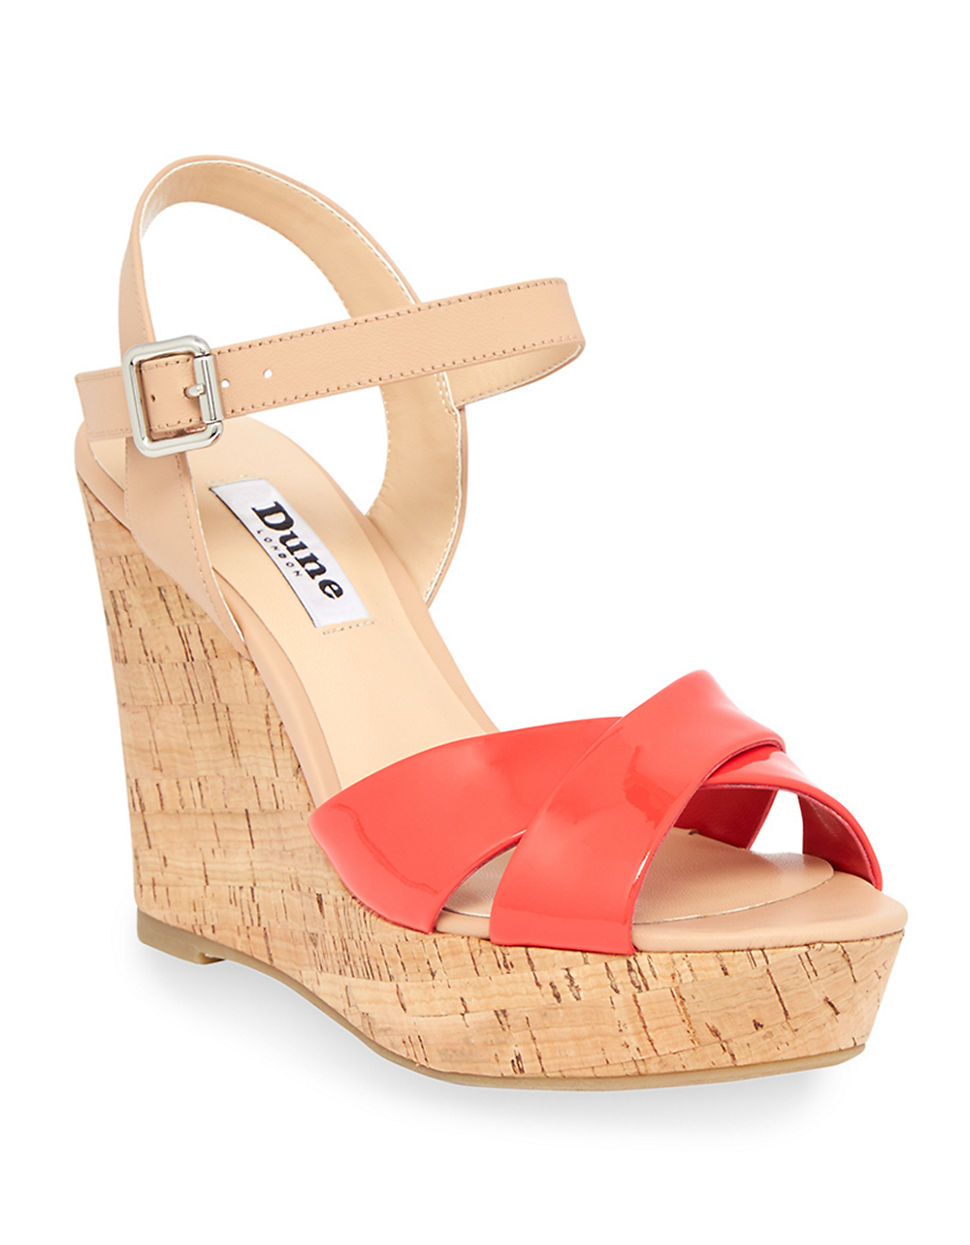 Lyst - Dune Kingdom Patent Leather Wedge Sandals in Pink